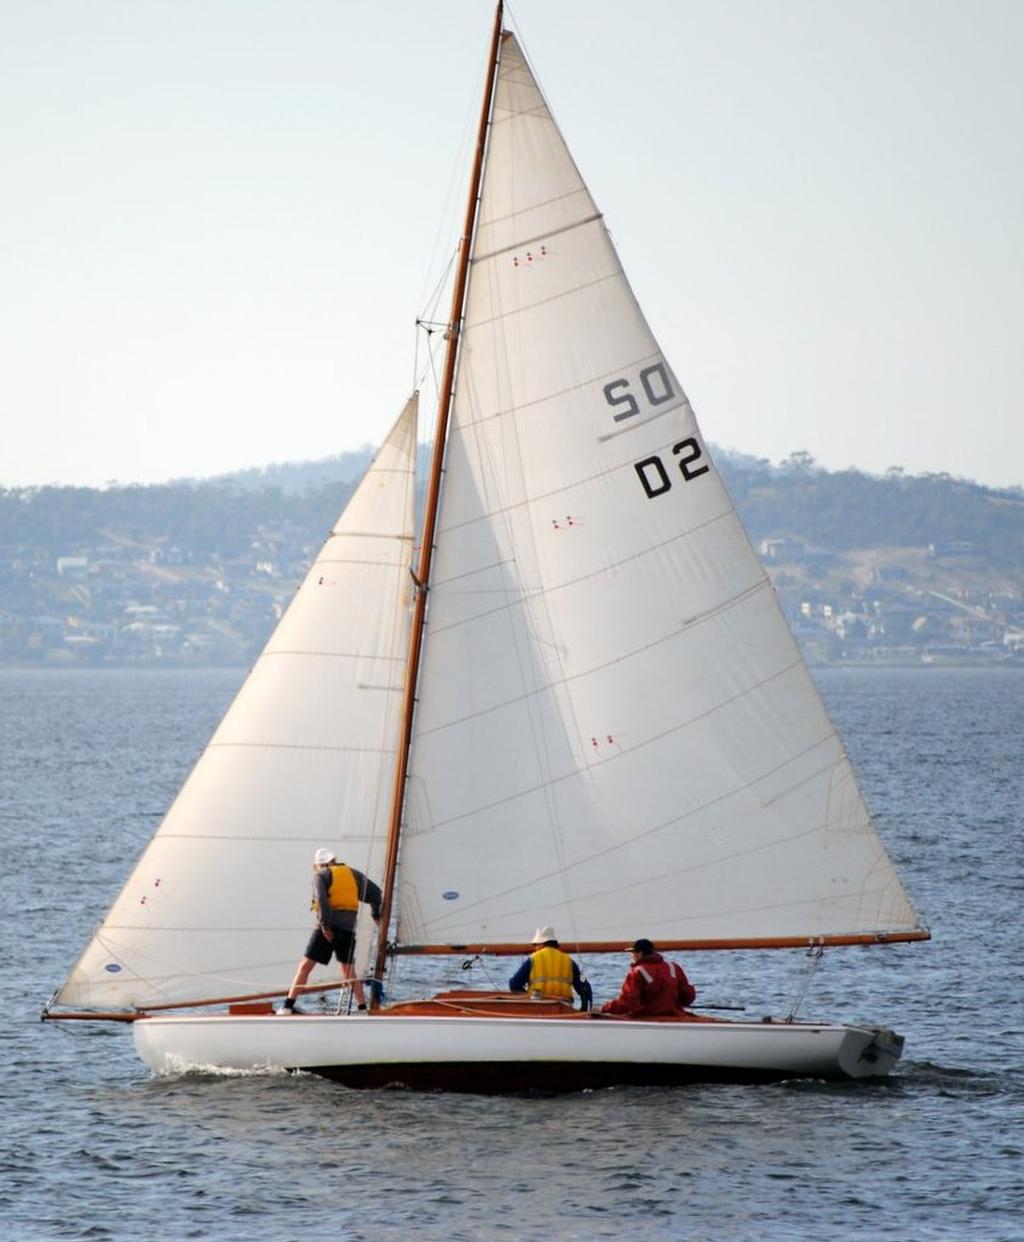 The vintage Derwent classers Gnome will be competing in the Barnes Bay Regatta © Peter Campbell